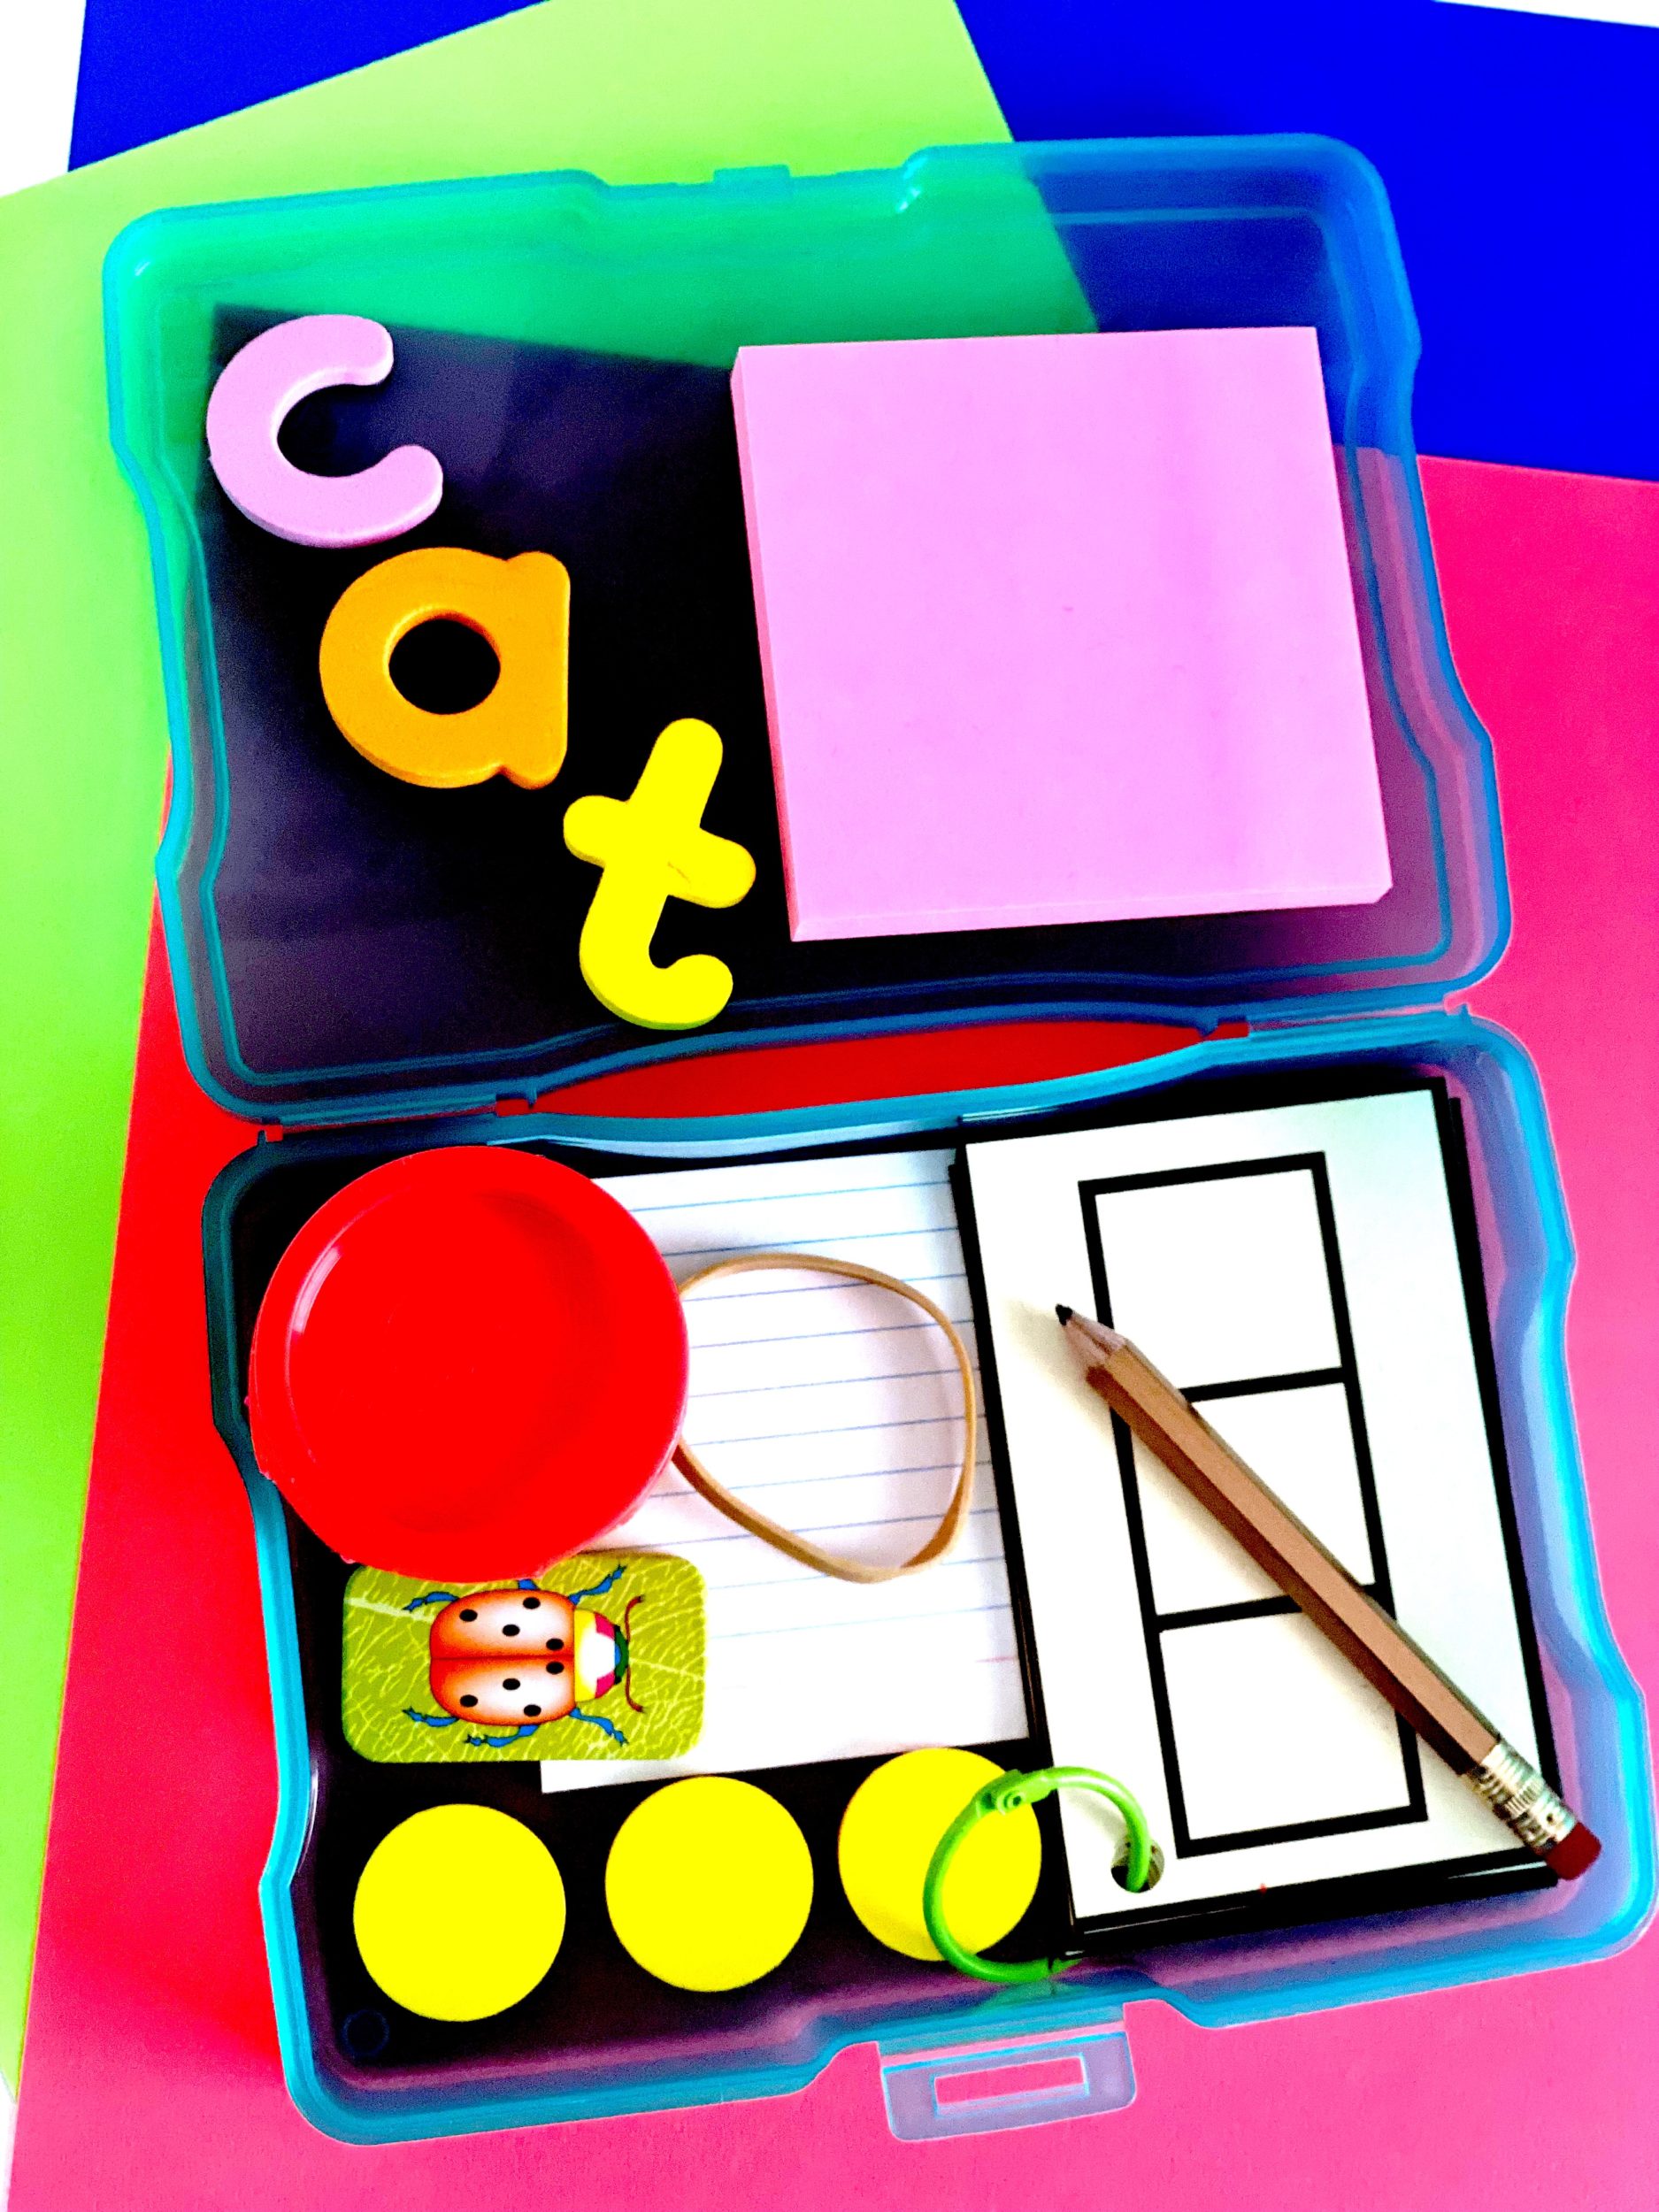 Enjoy this FREE Word Work Toolkit Guide for Literacy Centers and Activities! This easy-to-read visual guide will help you create a toolkit for your kindergarten and first grade students. It is easy to assemble, inexpensive, and will save valuable time! Read on to learn more and get your FREE download!